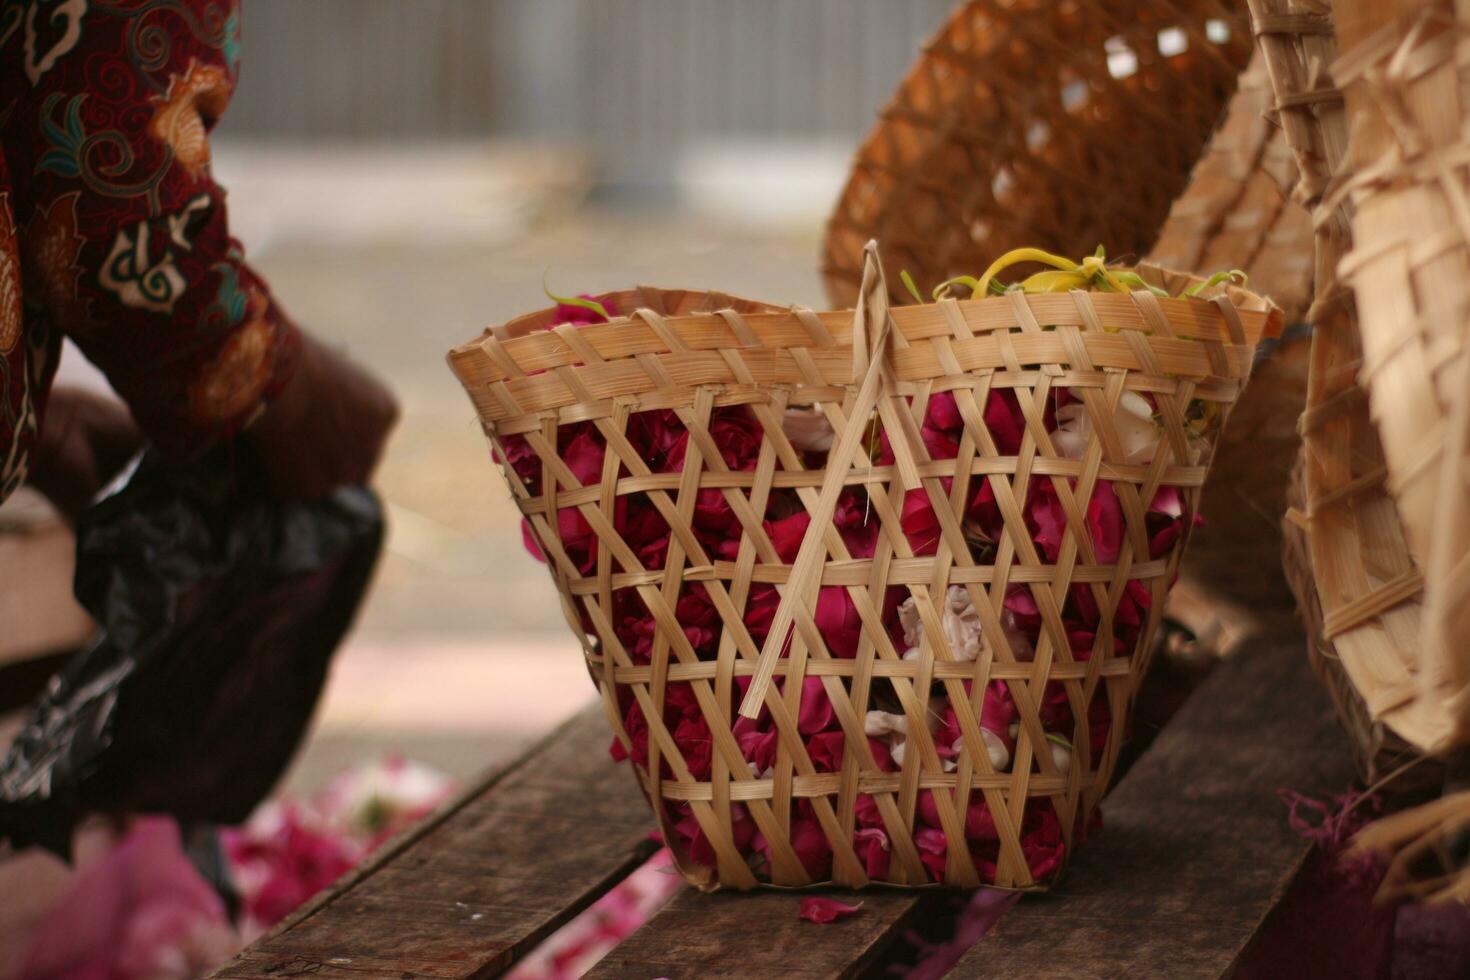 ed roses in wooden baskets are sold on the roadside. photo